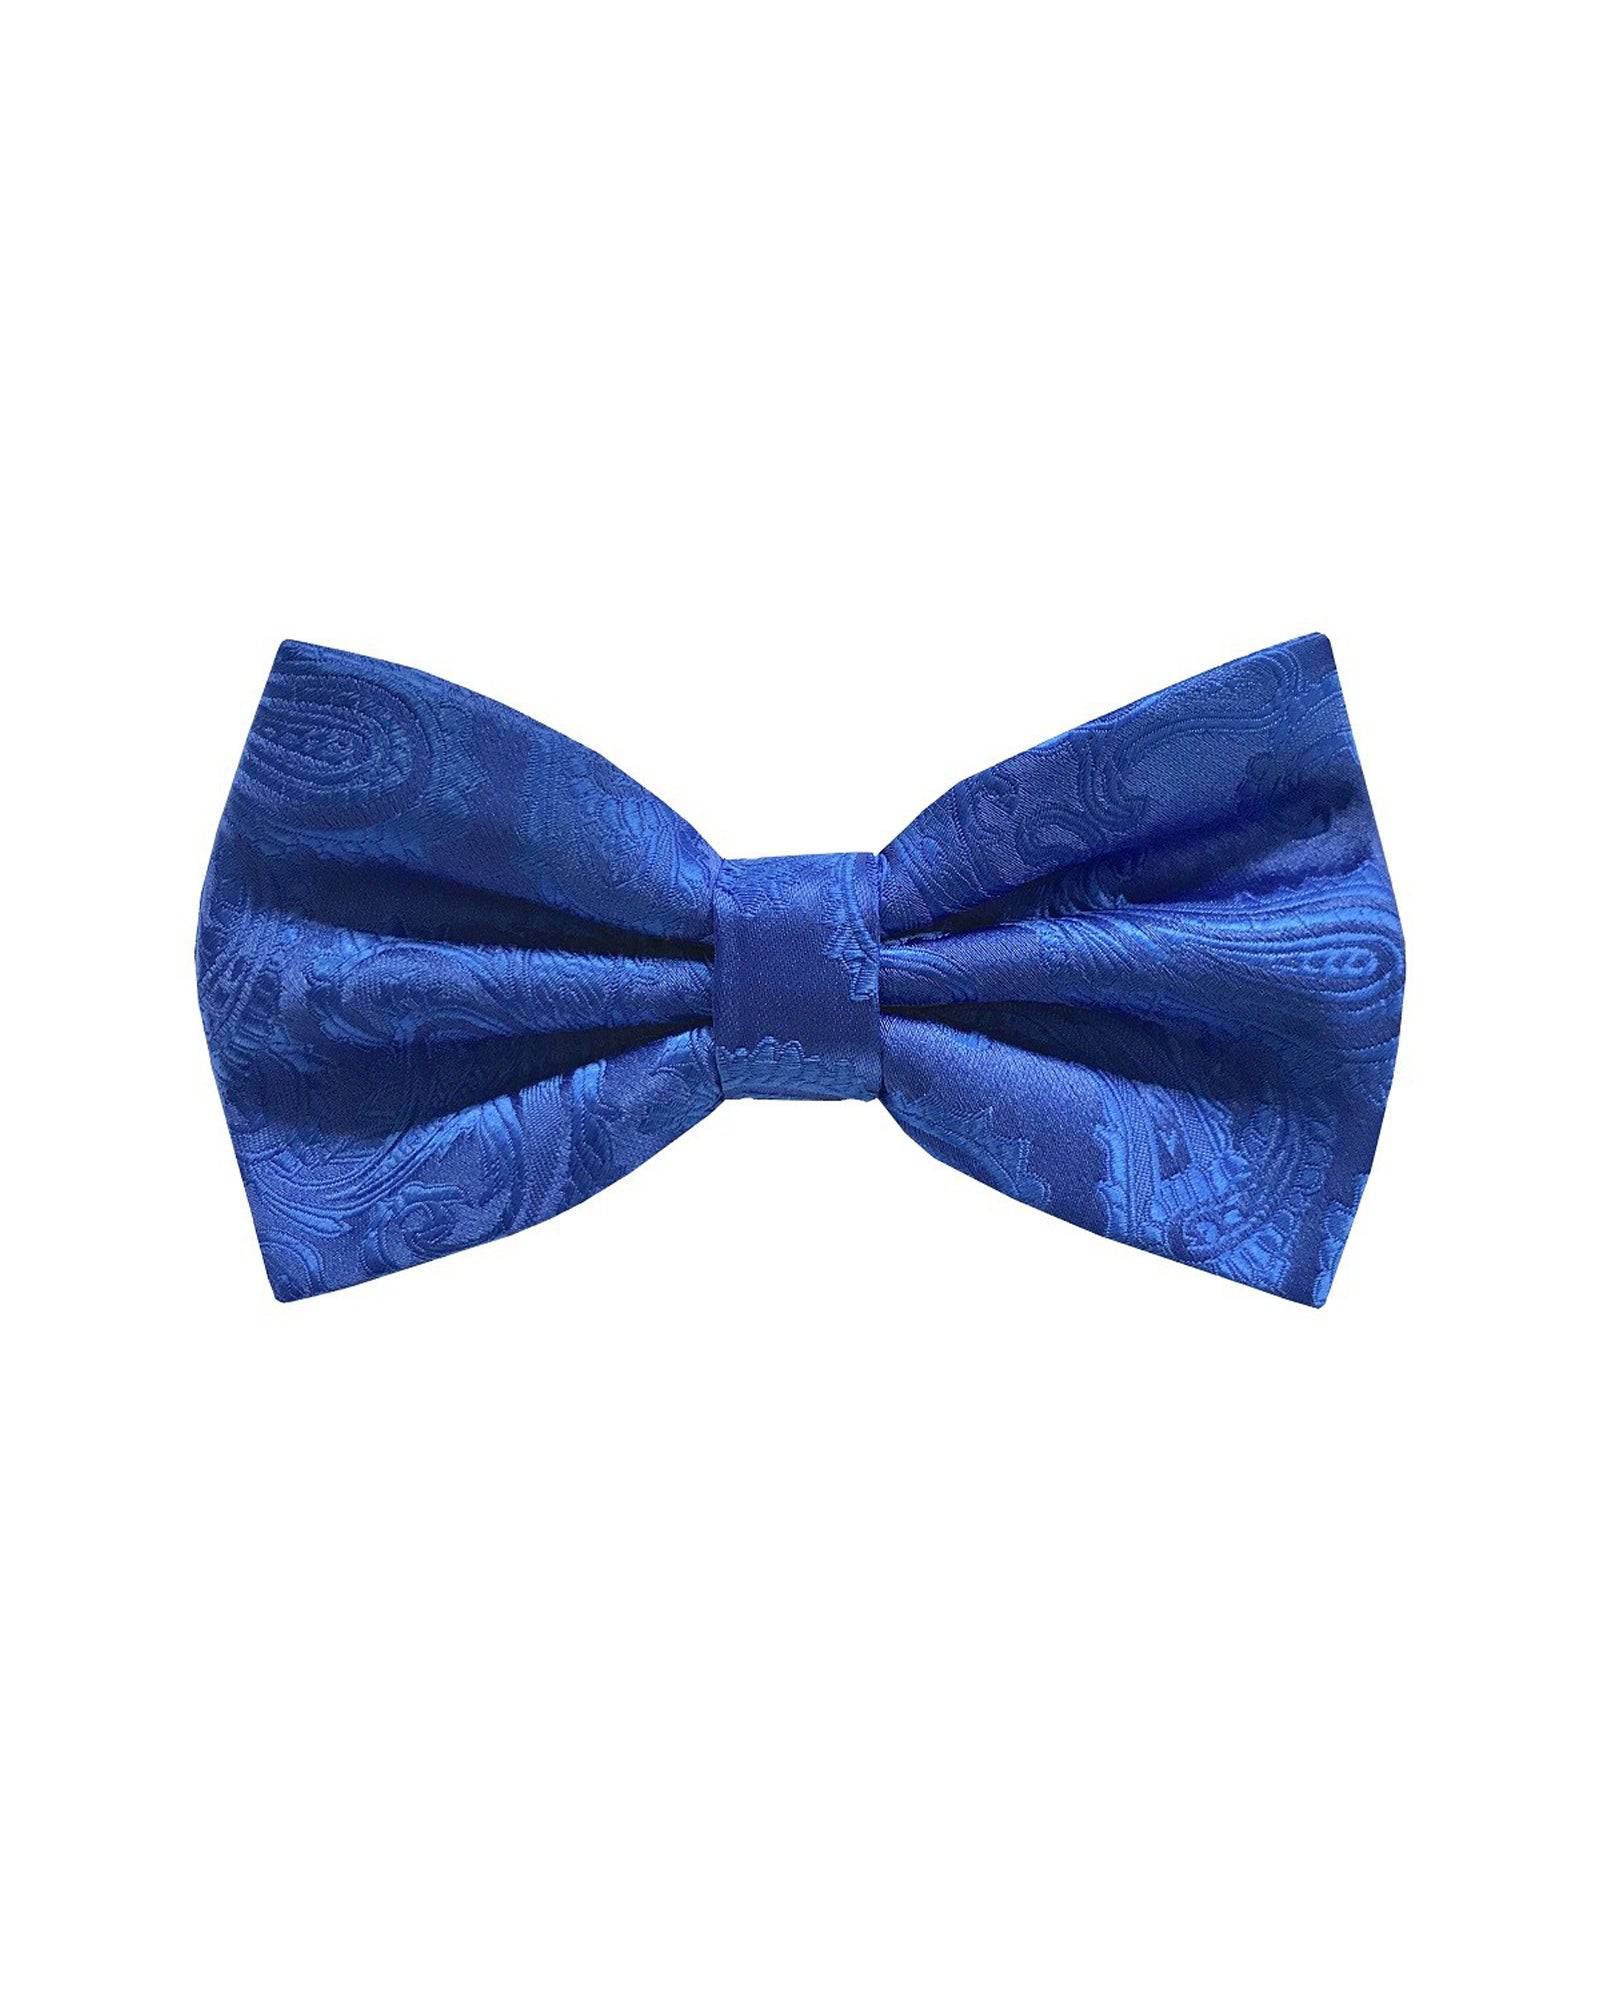 Bow Tie In Paisley Pattern Royal - Rainwater's Men's Clothing and Tuxedo Rental